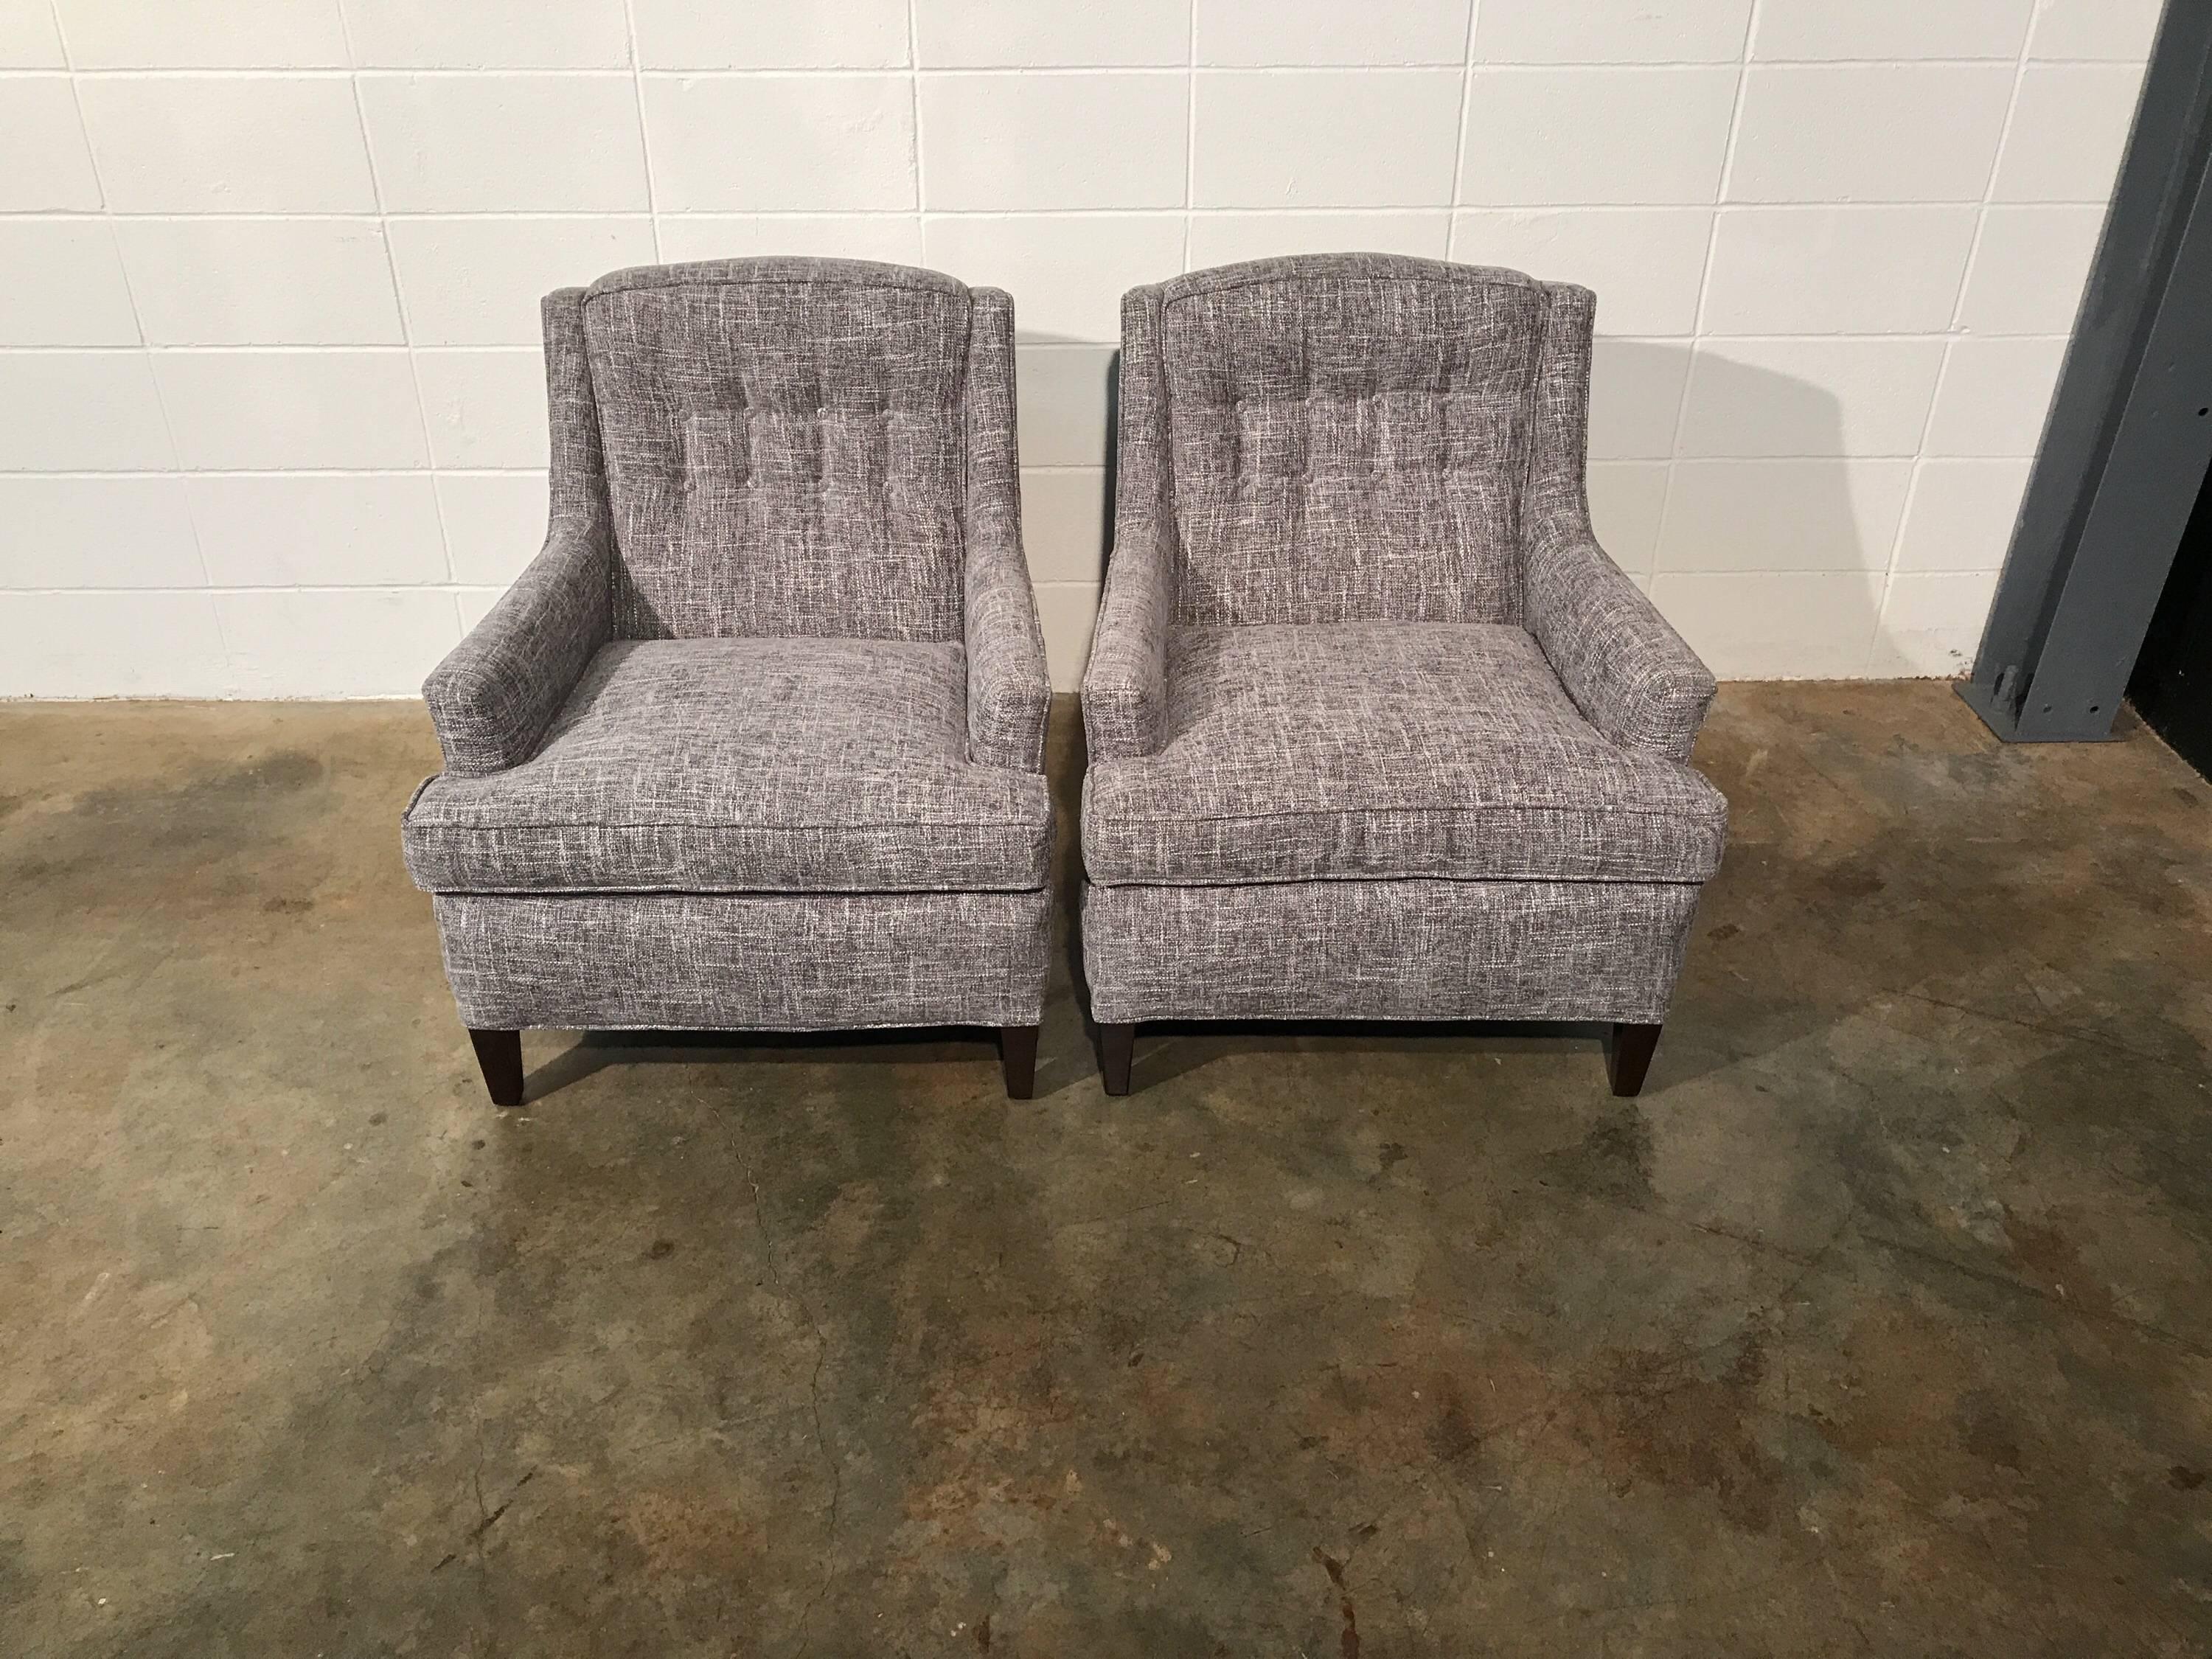 Pair of fully restored Mid-Century Modern lounge chairs. All new gray upholstery and refinished legs bring these beauties back to life. The timeless design will blend with nearly any style in any space. Extra buttons included
 The chairs have no